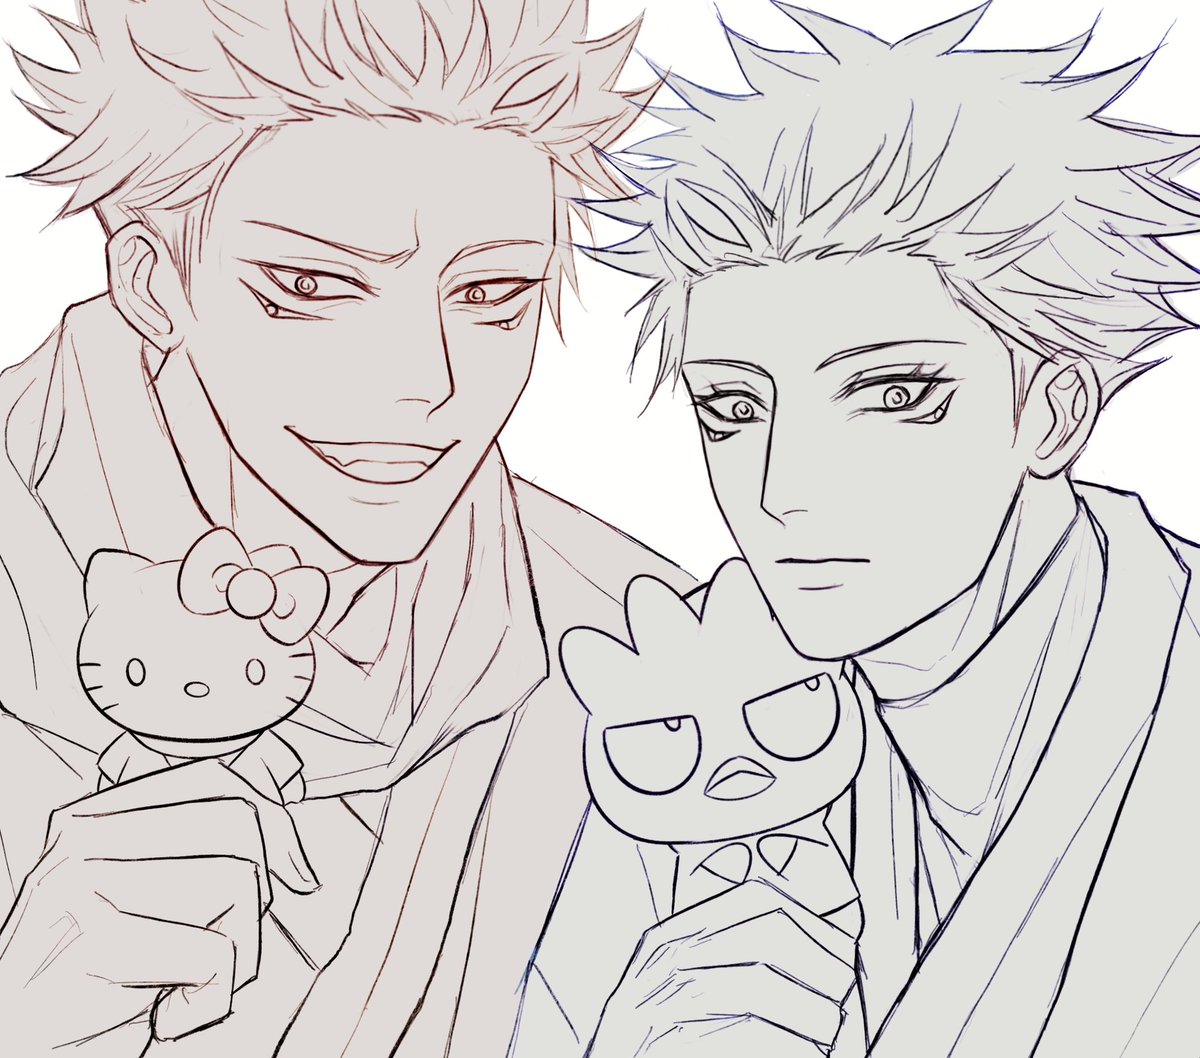 i think they'd be good friends  #呪術廻戦 #宿儺 #jjk #sukuna #wip